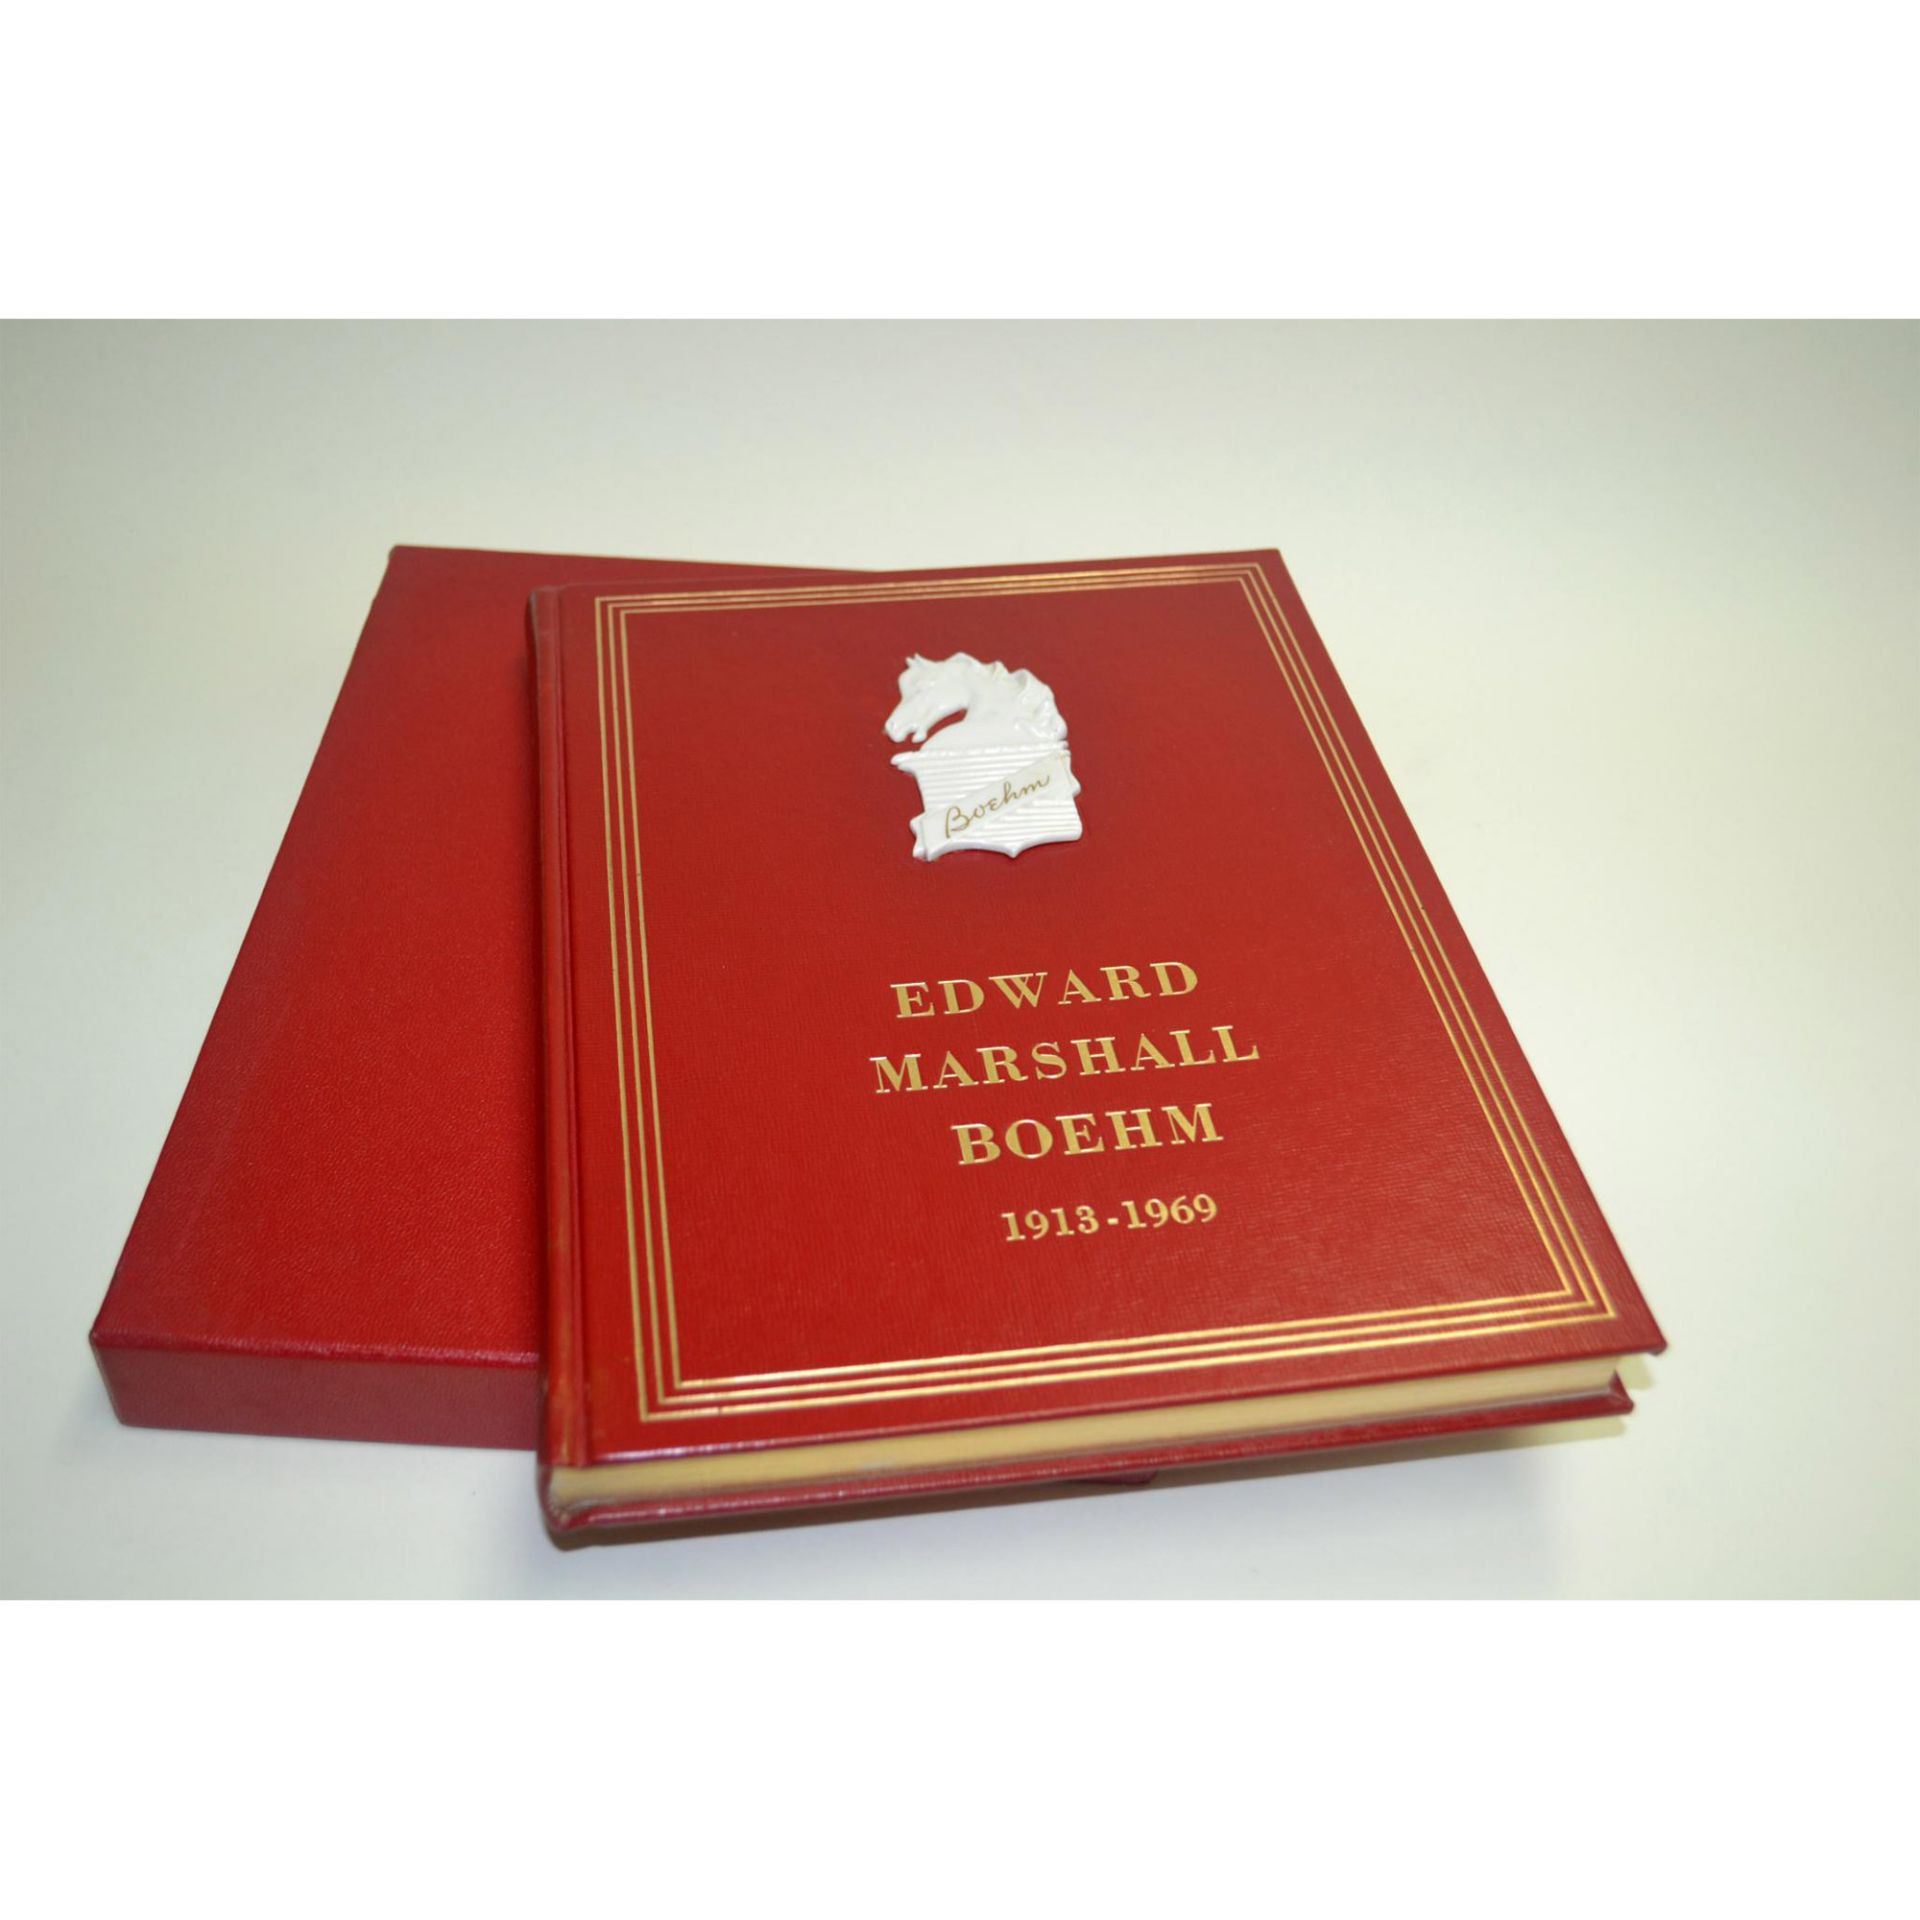 The Edward Marshall Boehm Leather Book With Sleeve, 1913-1969 Limited Edition, 1970